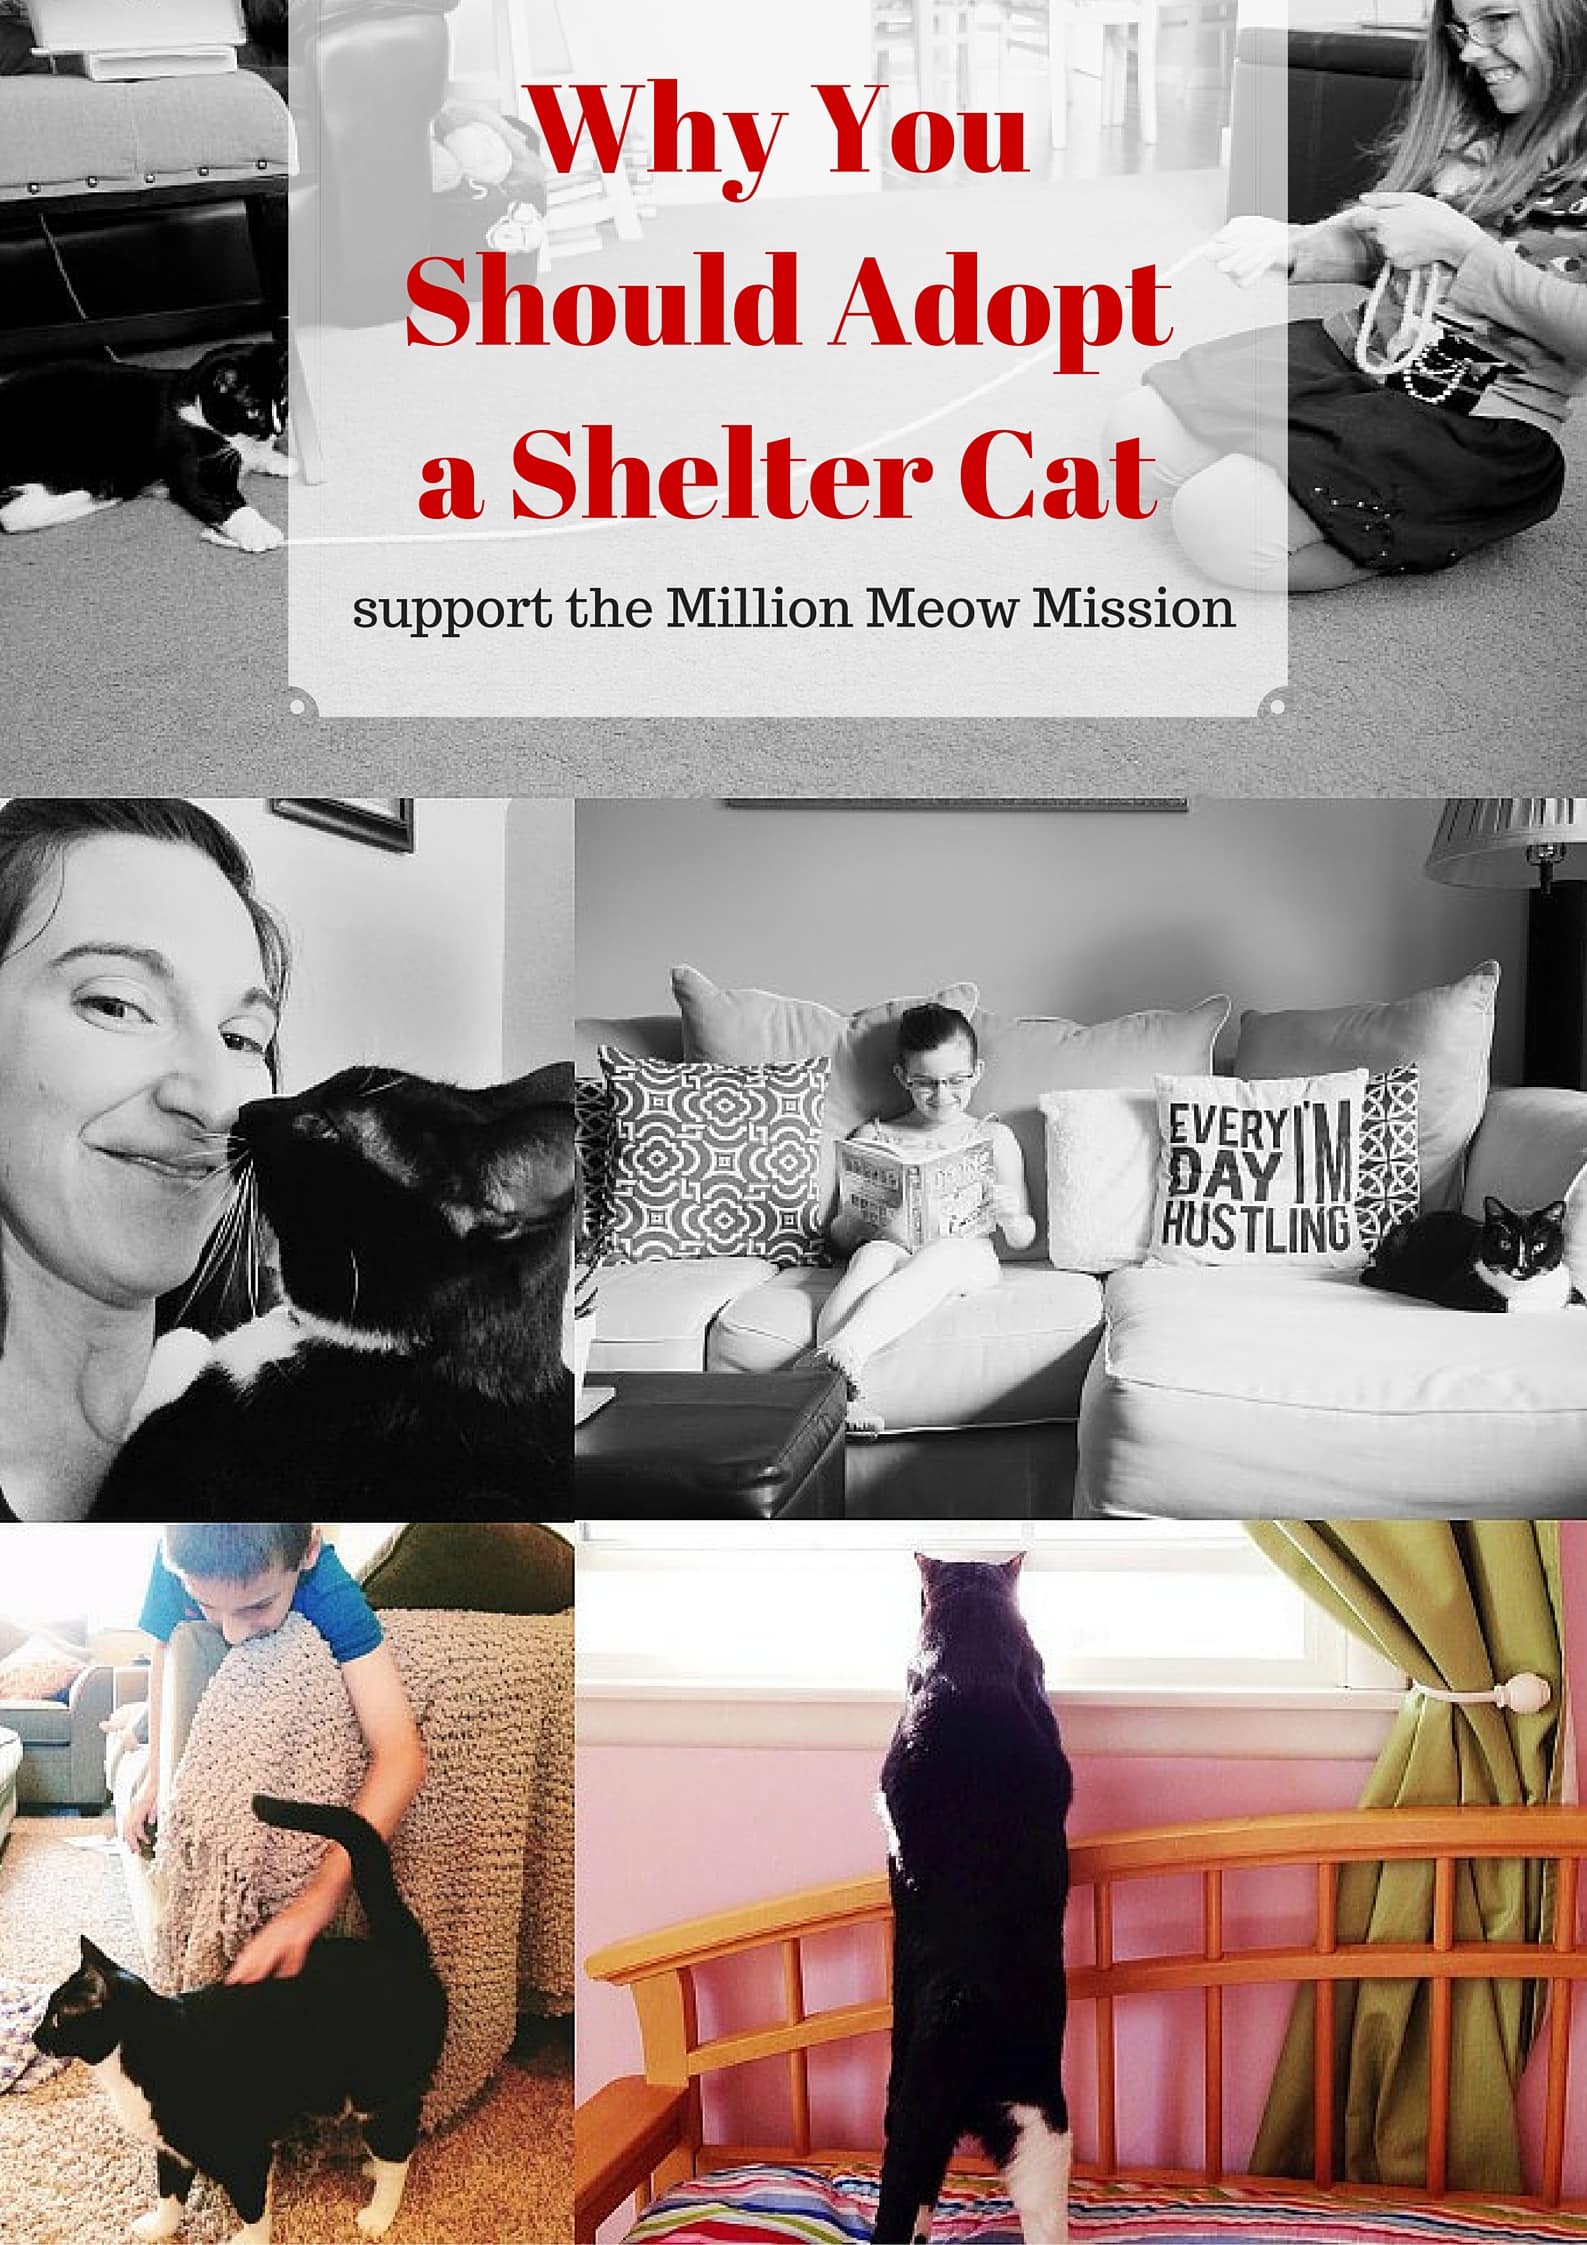 What We Have Learned From Adopting a Shelter Cat